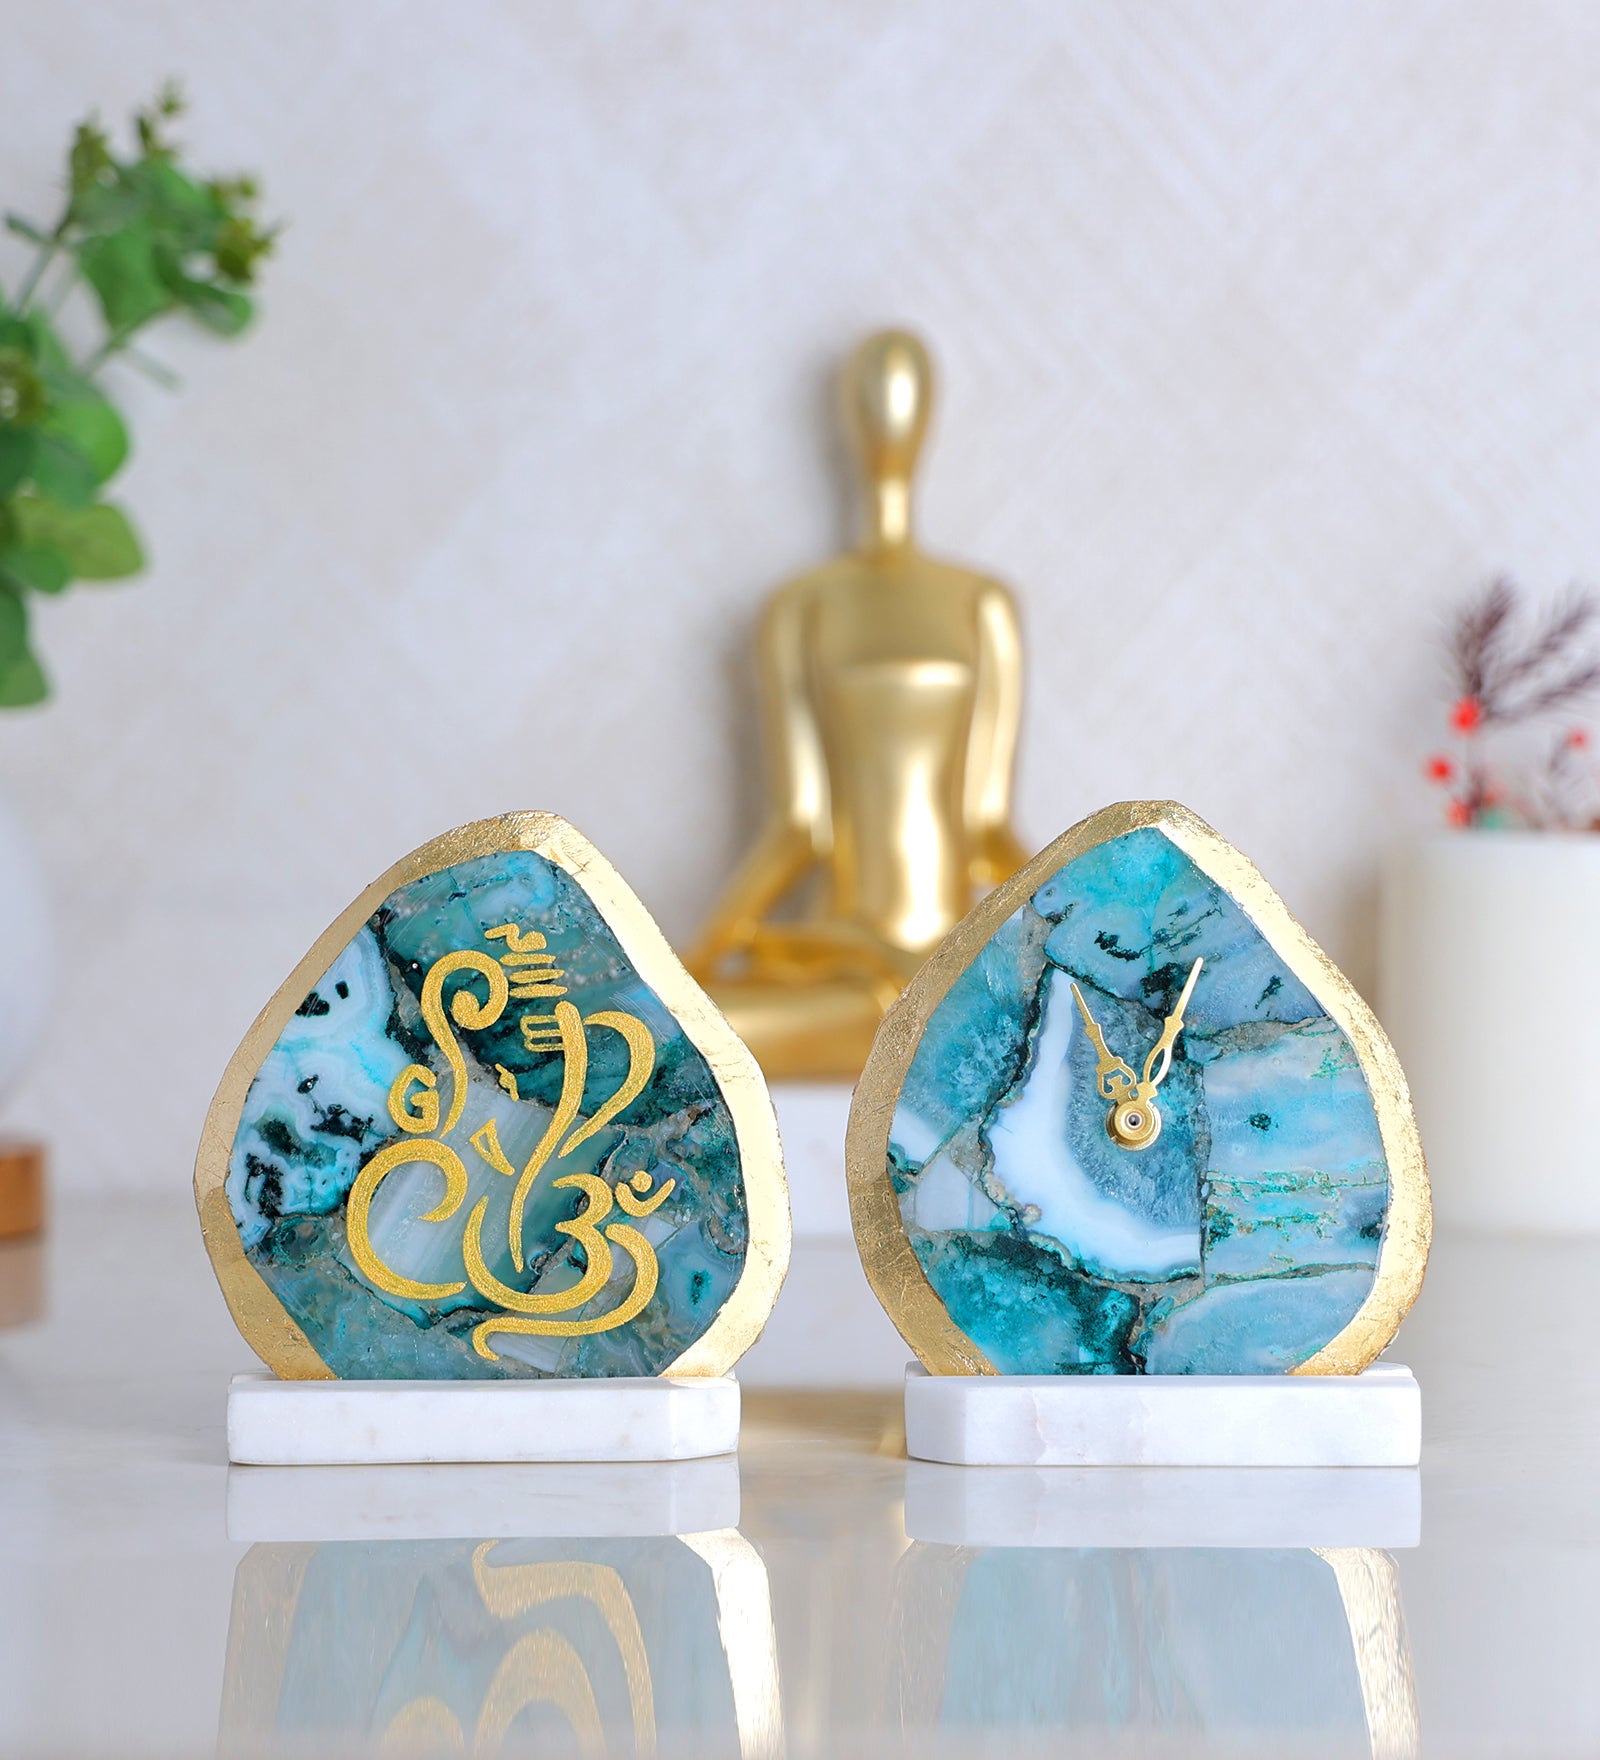 Set of one Agate Table Clock and one Ganesha Showpiece